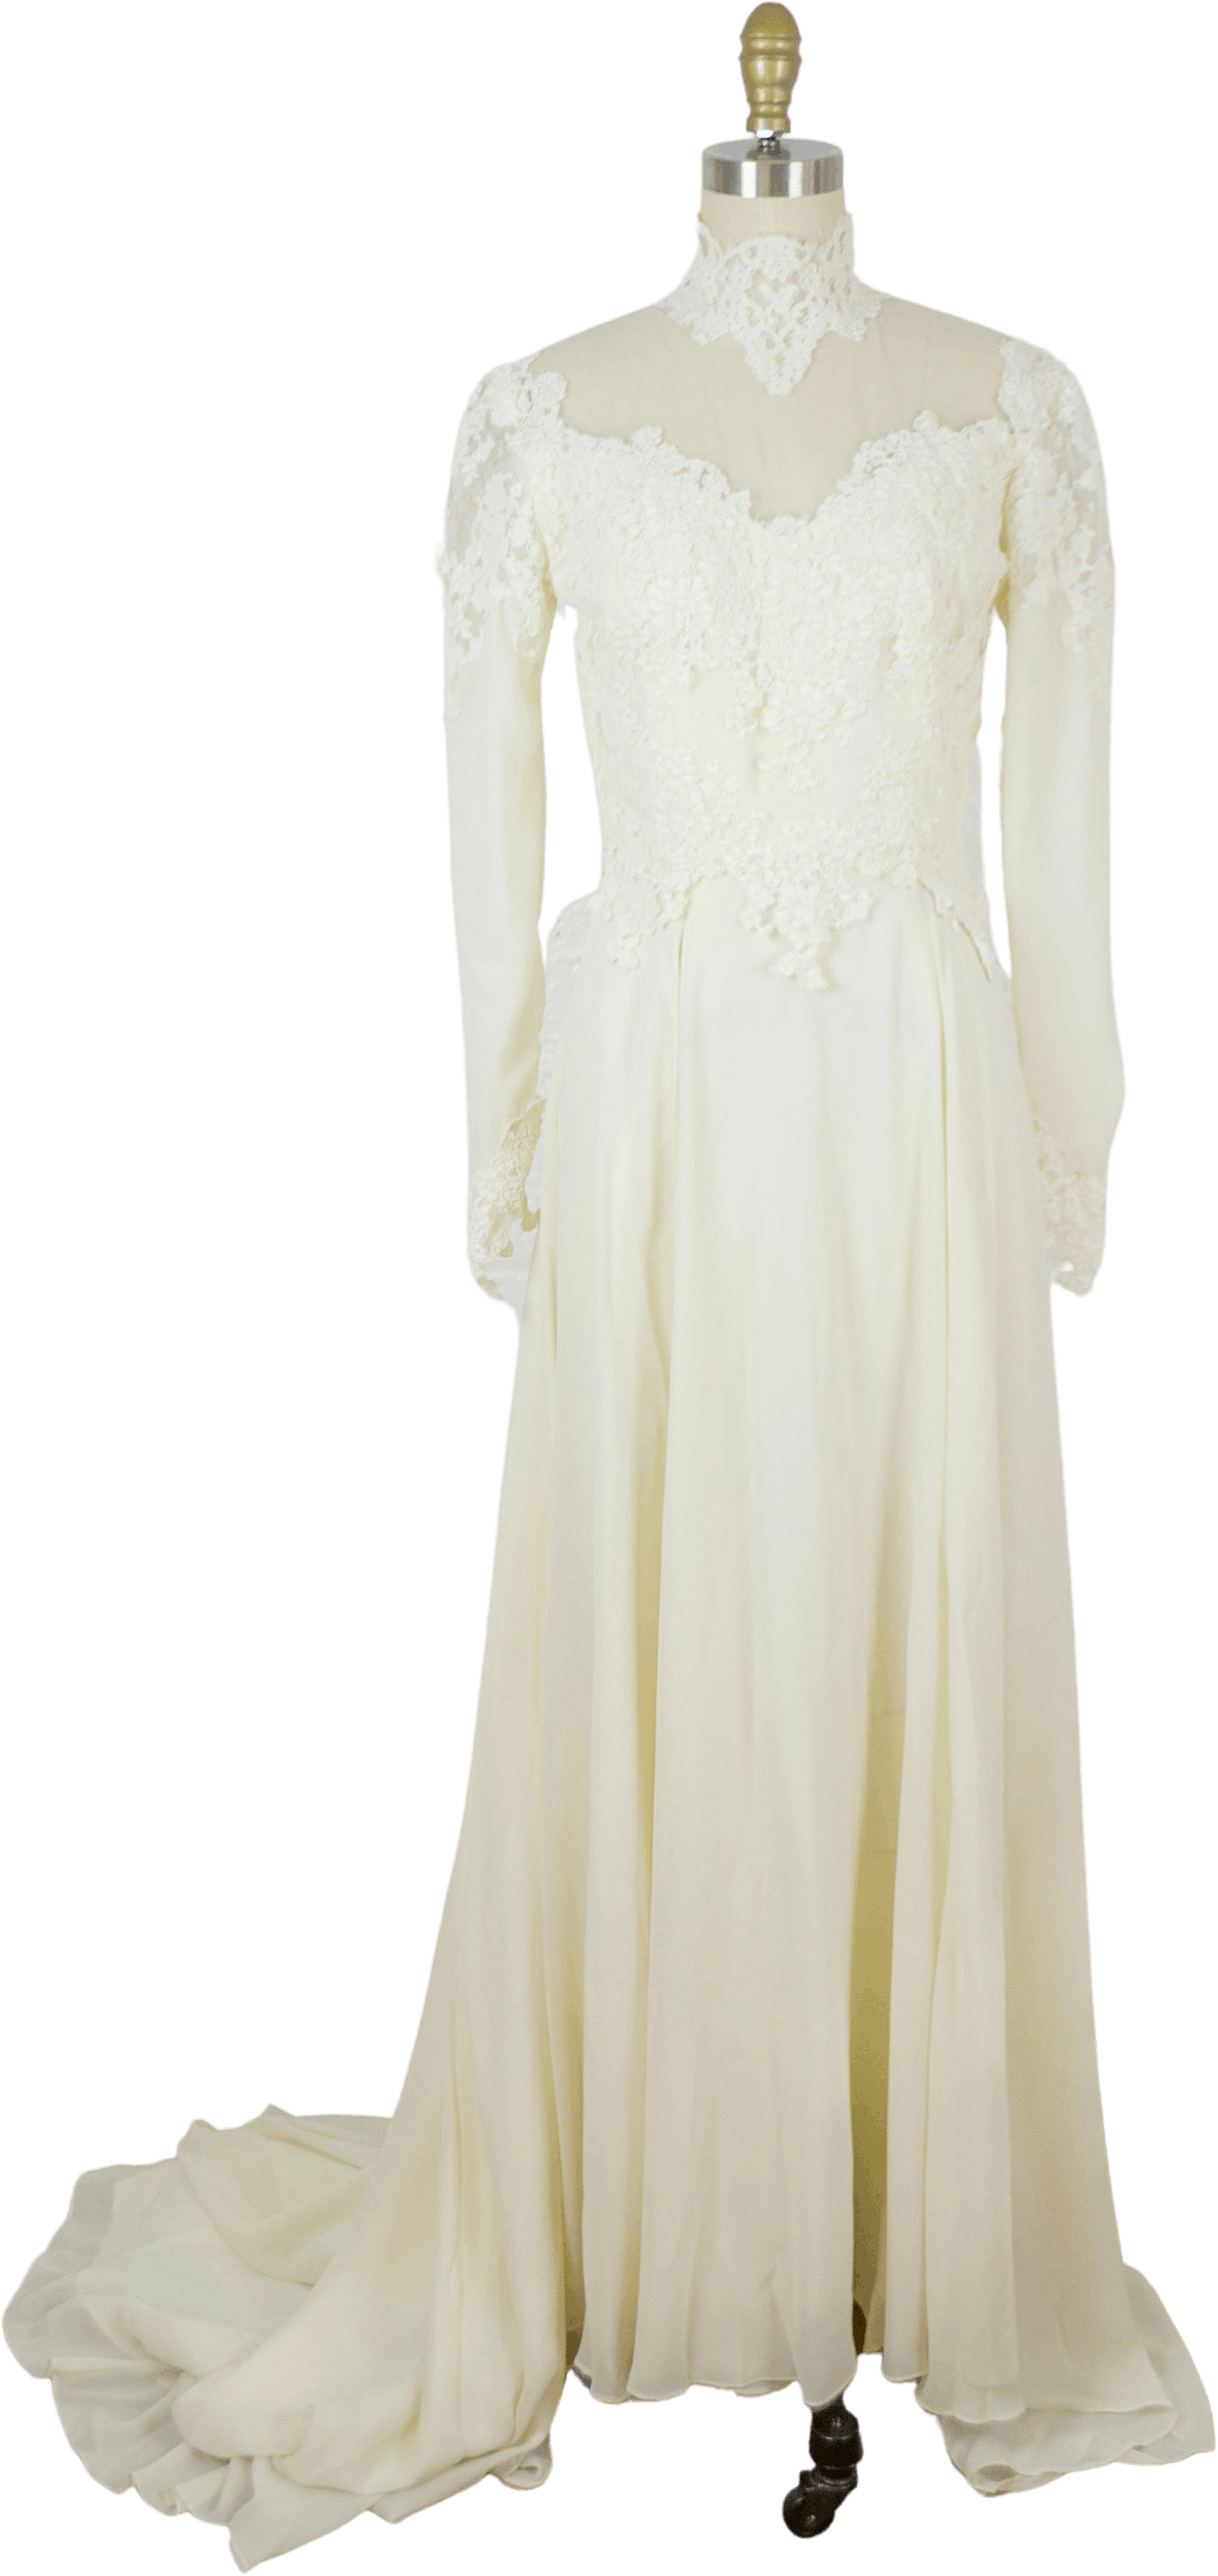 Vintage 70s Chiffon And Lace Victorian Style Wedding Dress Shop Thrilling 1164